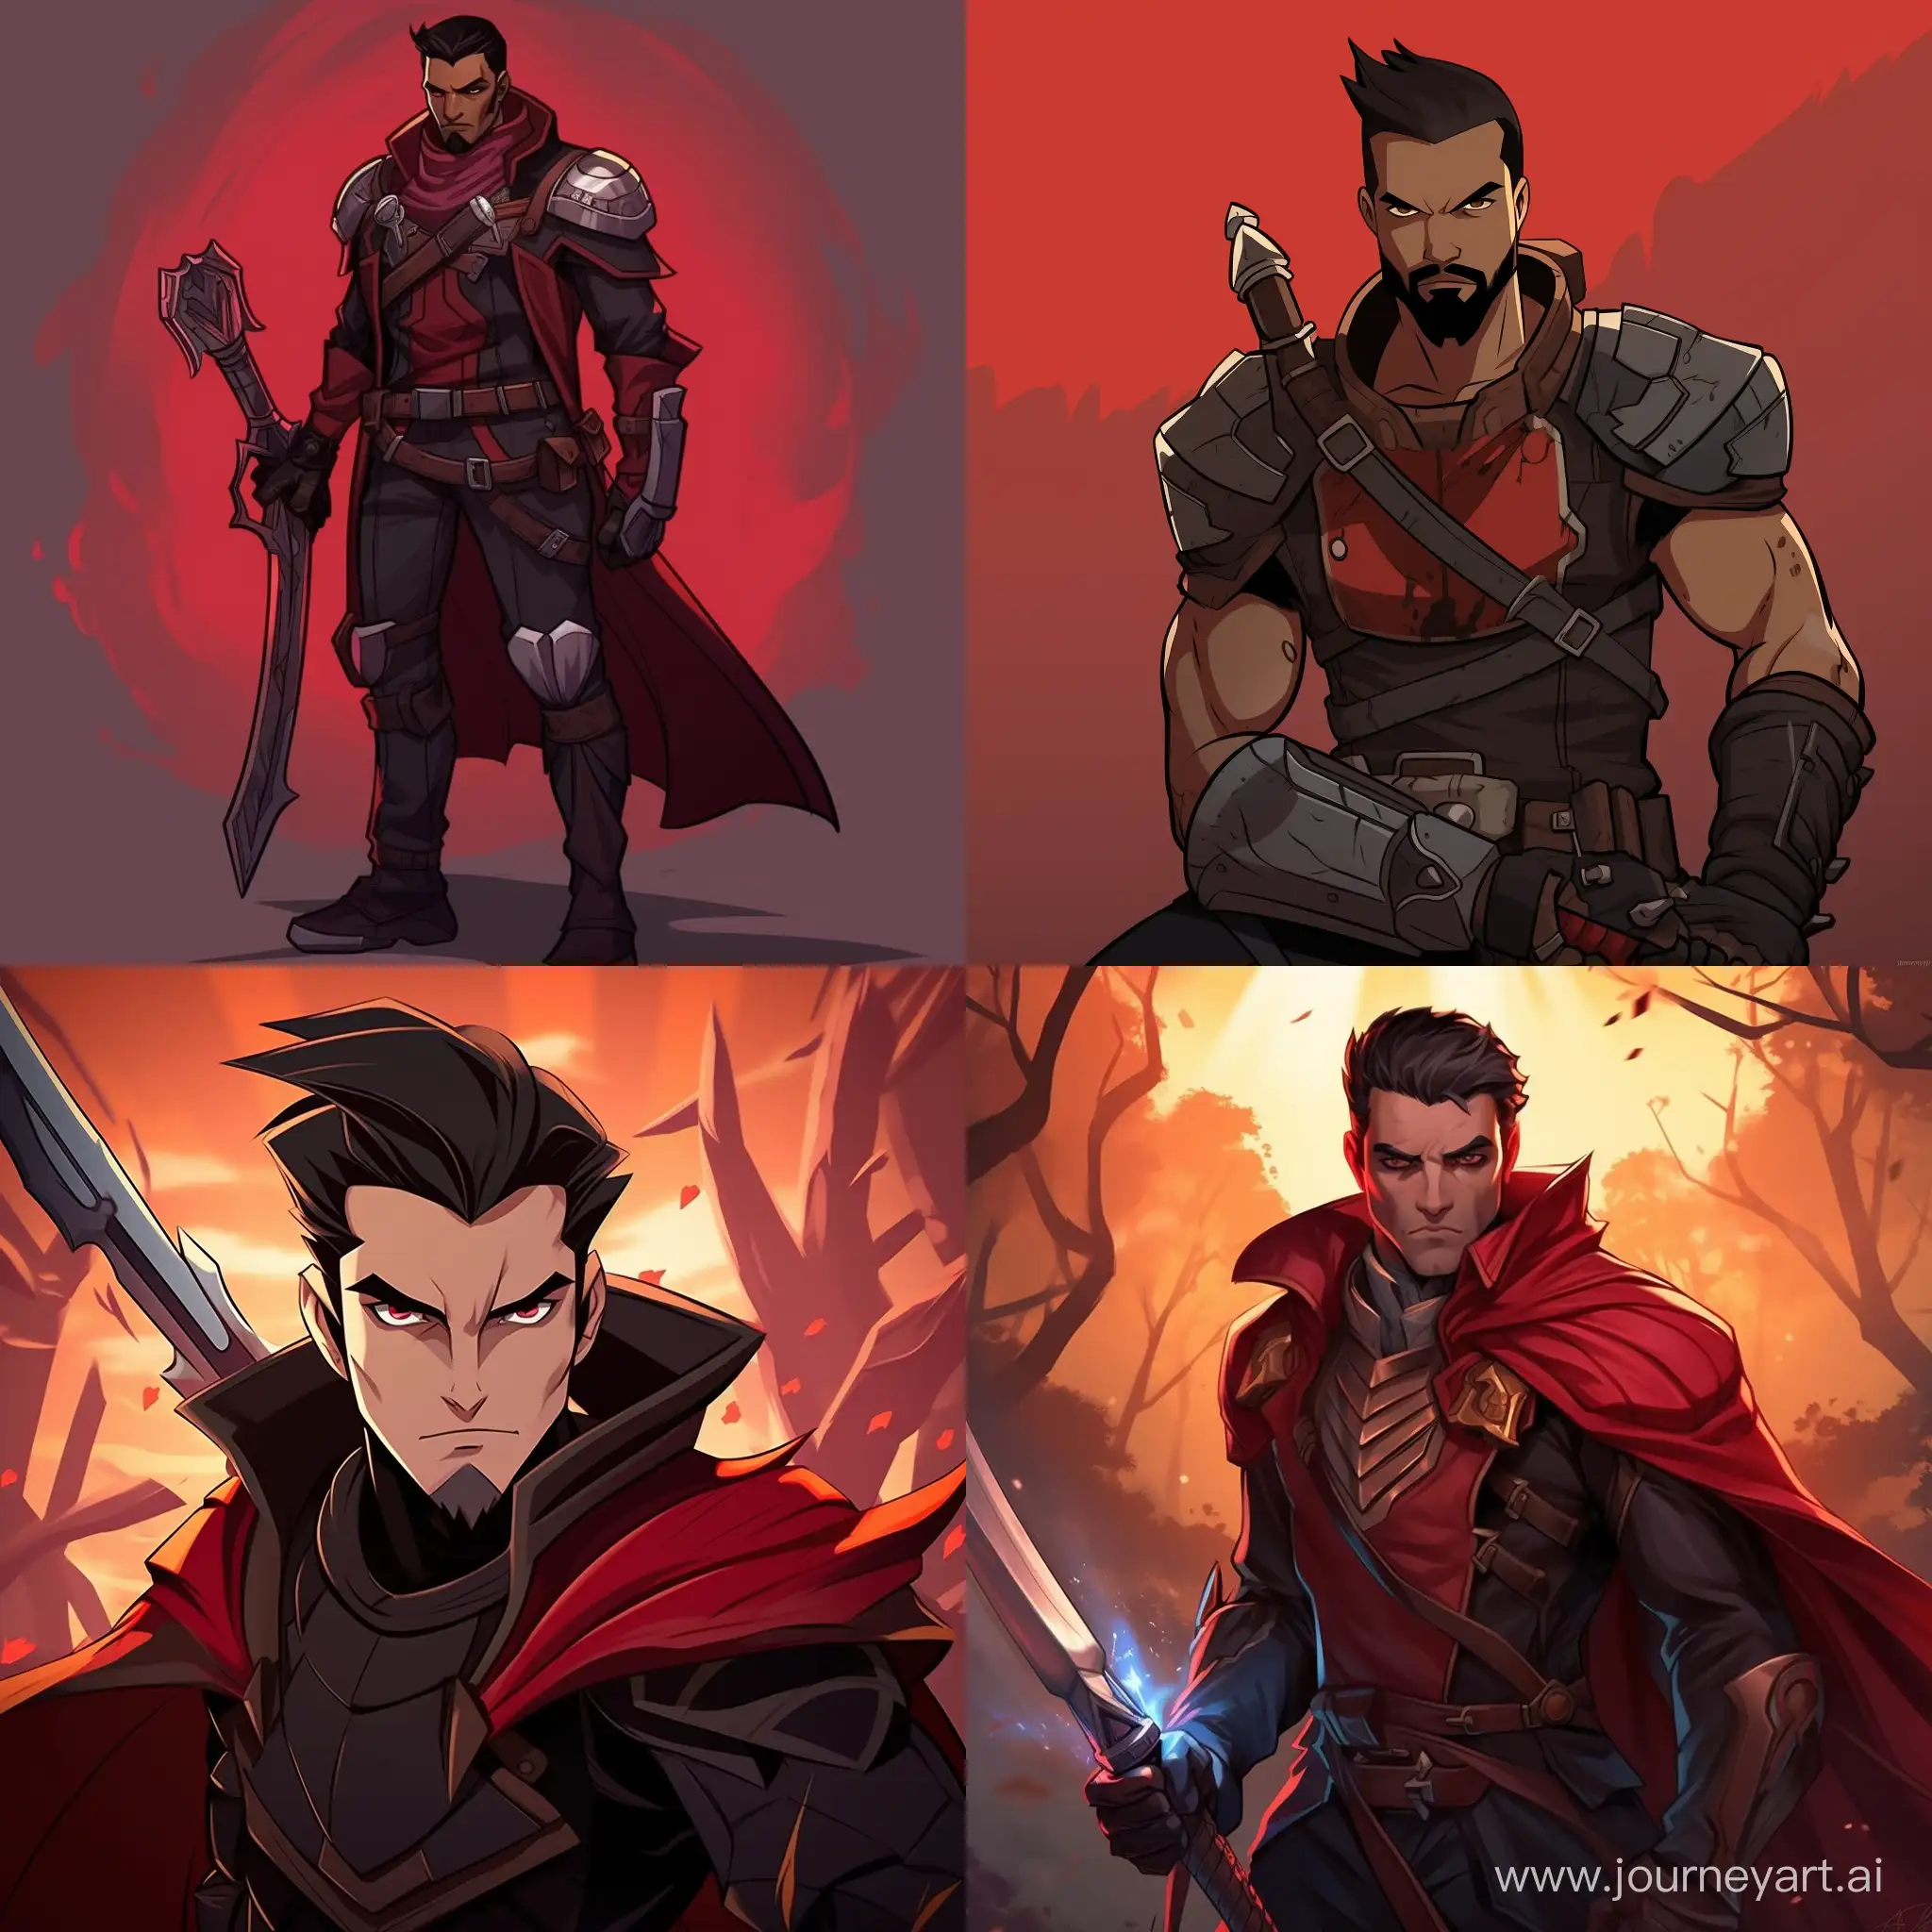 Darius from League of Legends in the style of the animated series Arcane